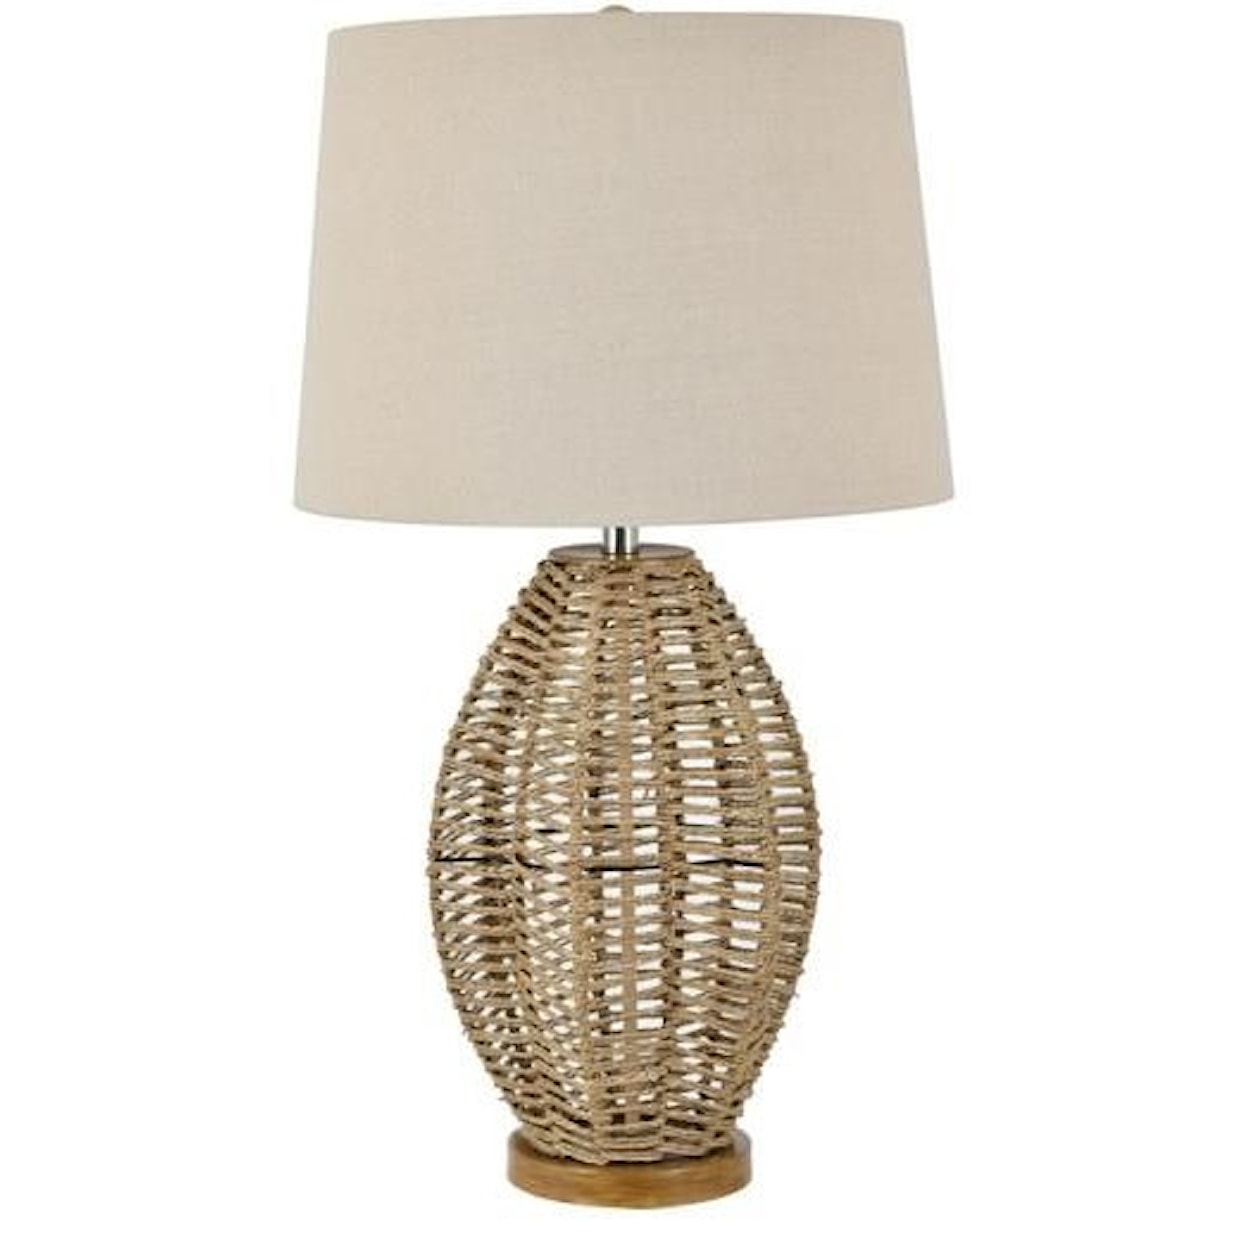 Crestview Collection Lighting paxton lamp